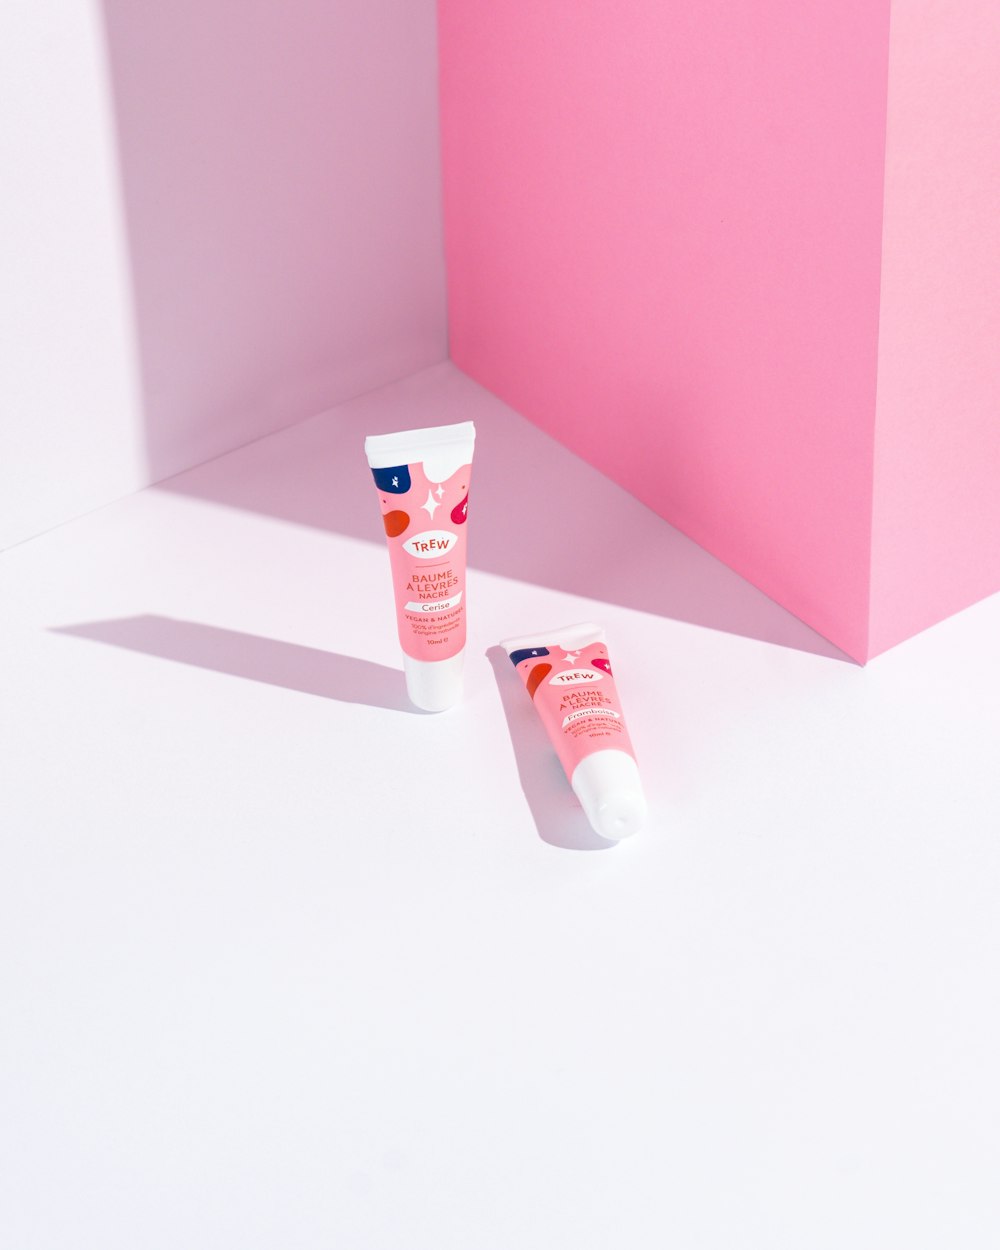 two tubes of toothpaste sitting next to a pink box